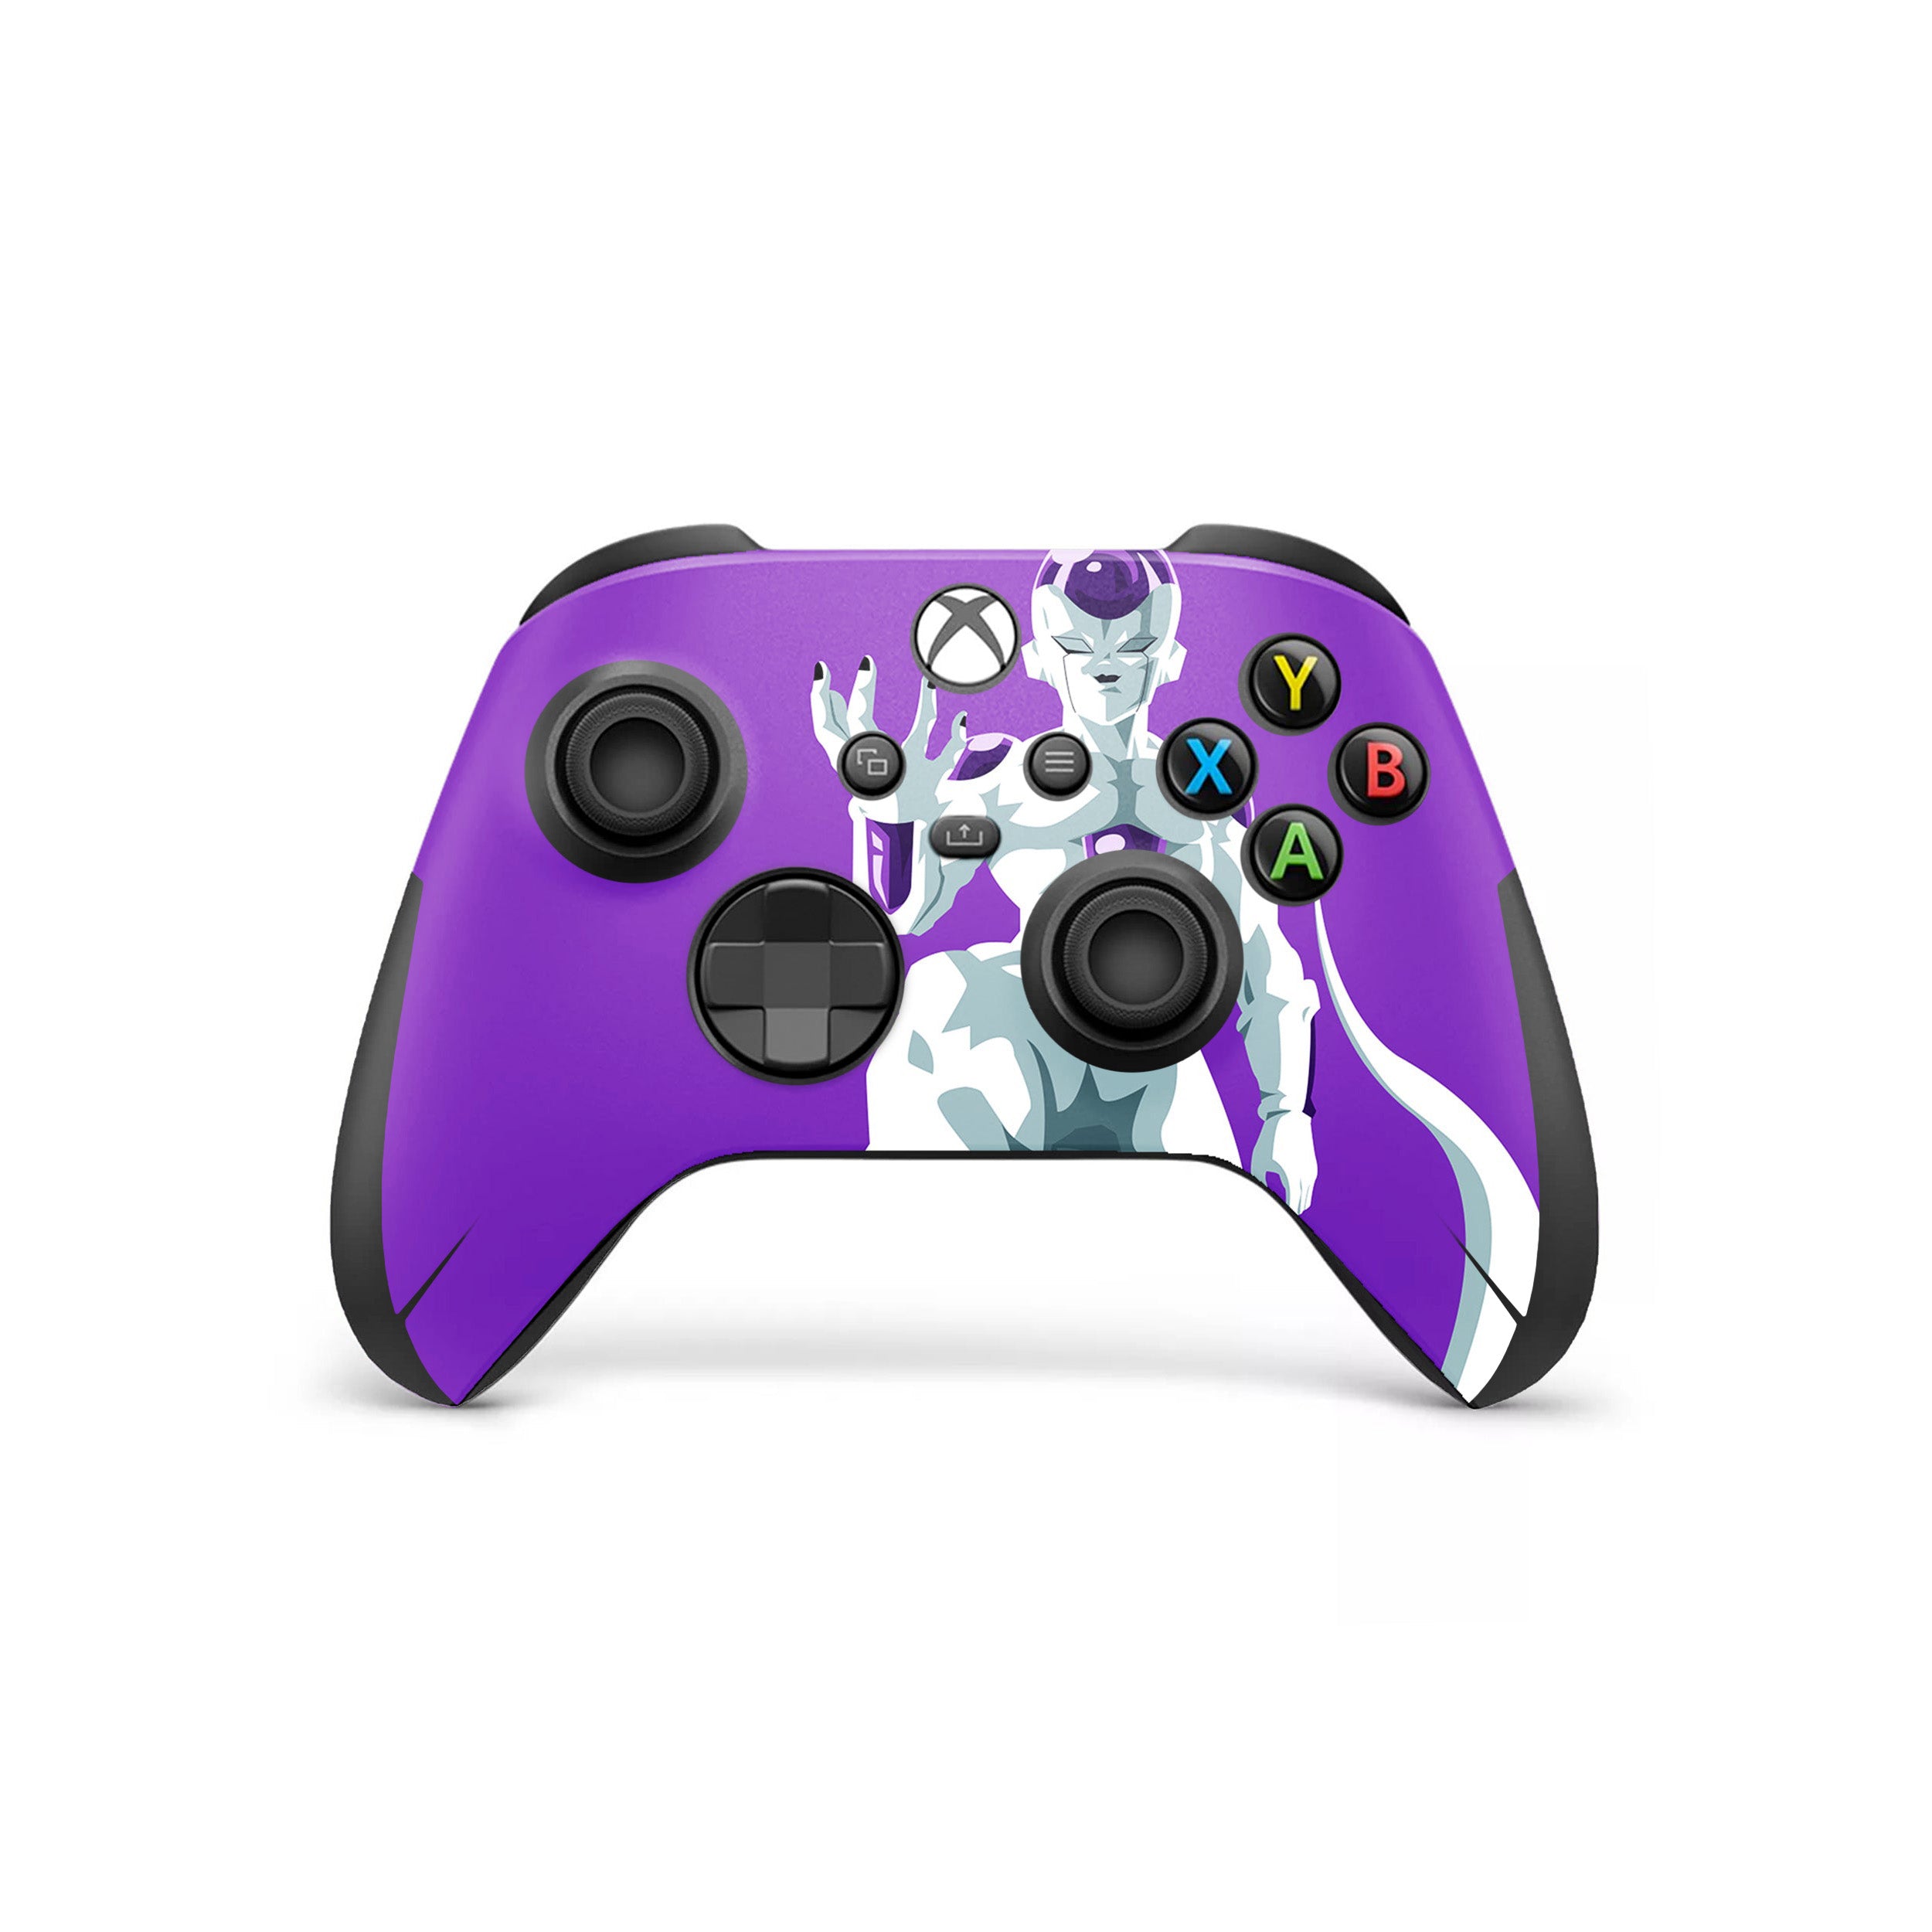 A video game skin featuring a Dragon Ball Z Frieza design for the Xbox Wireless Controller.